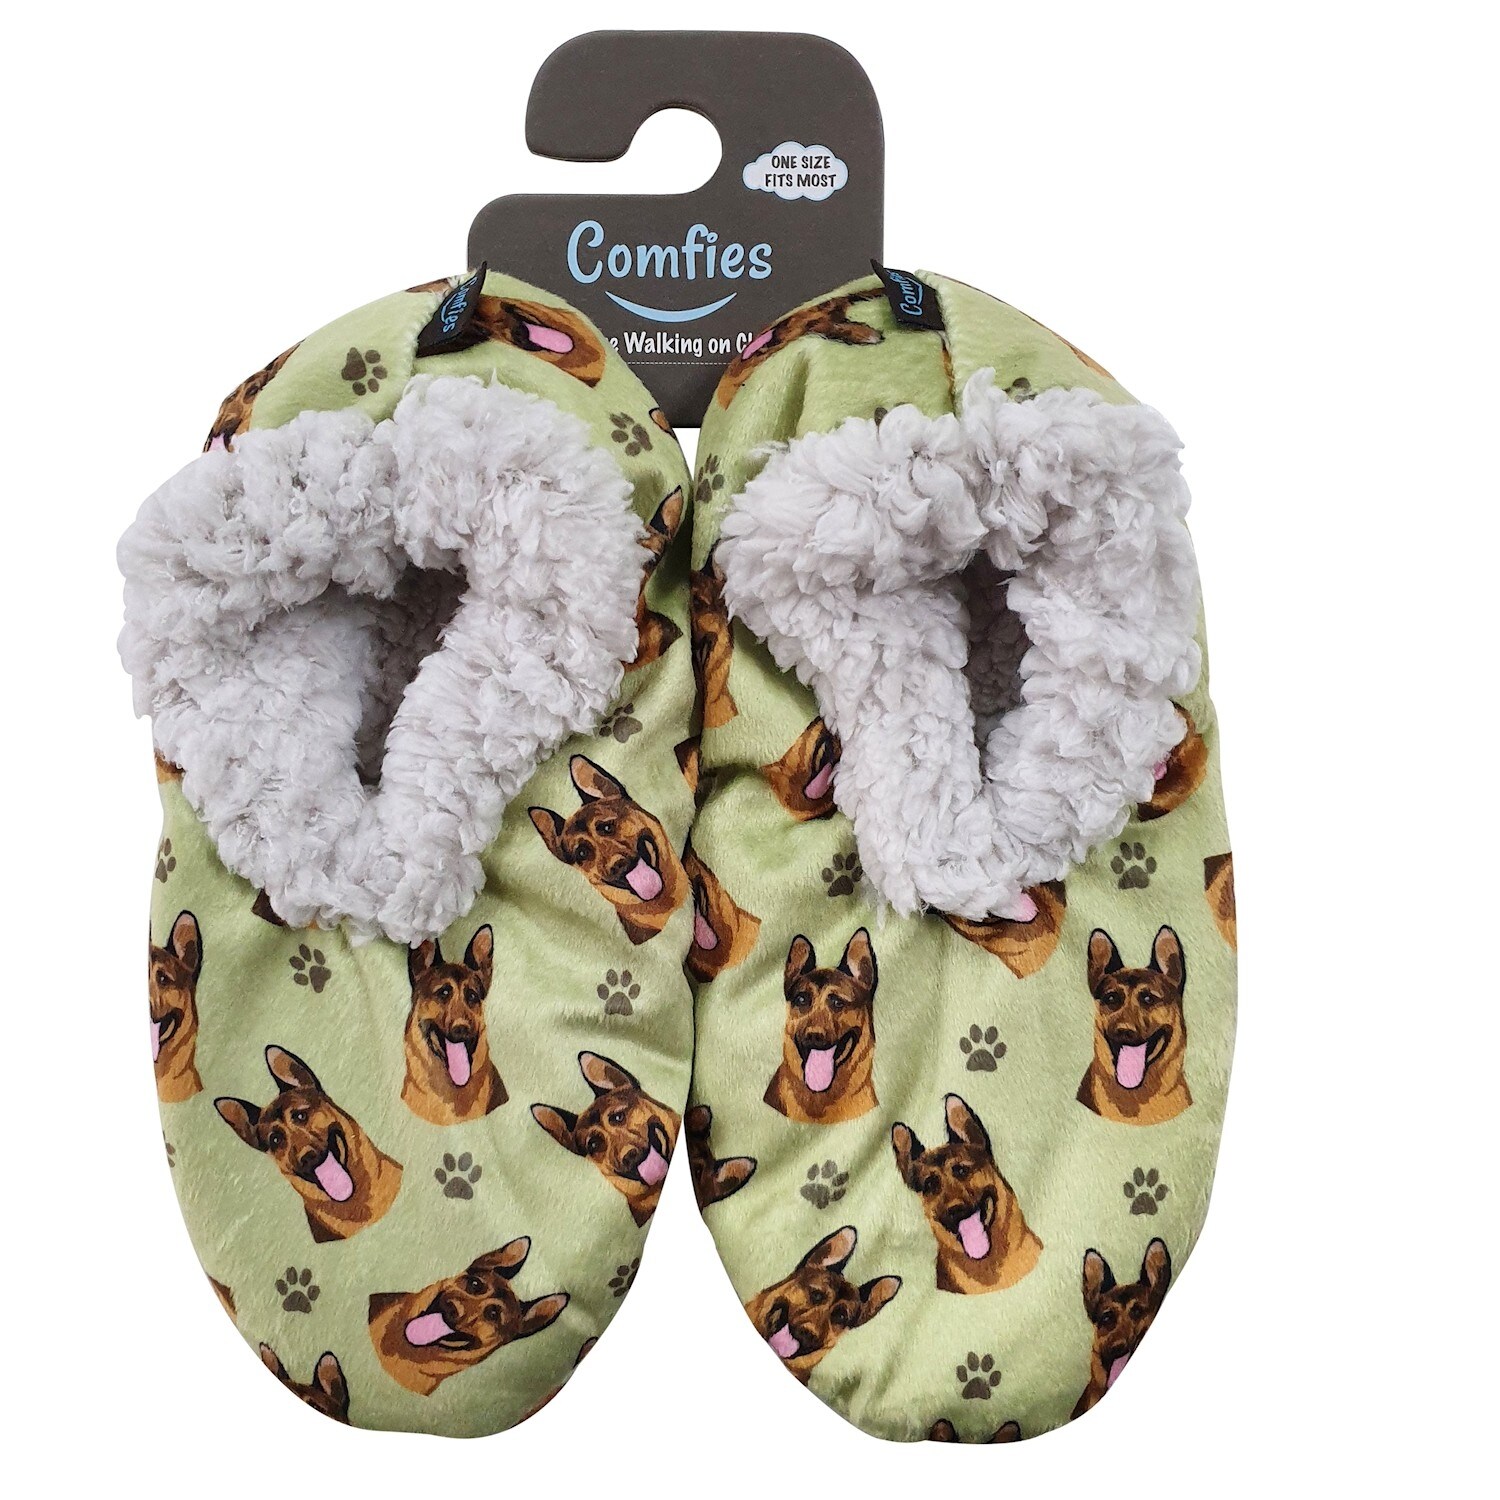 doggy slippers